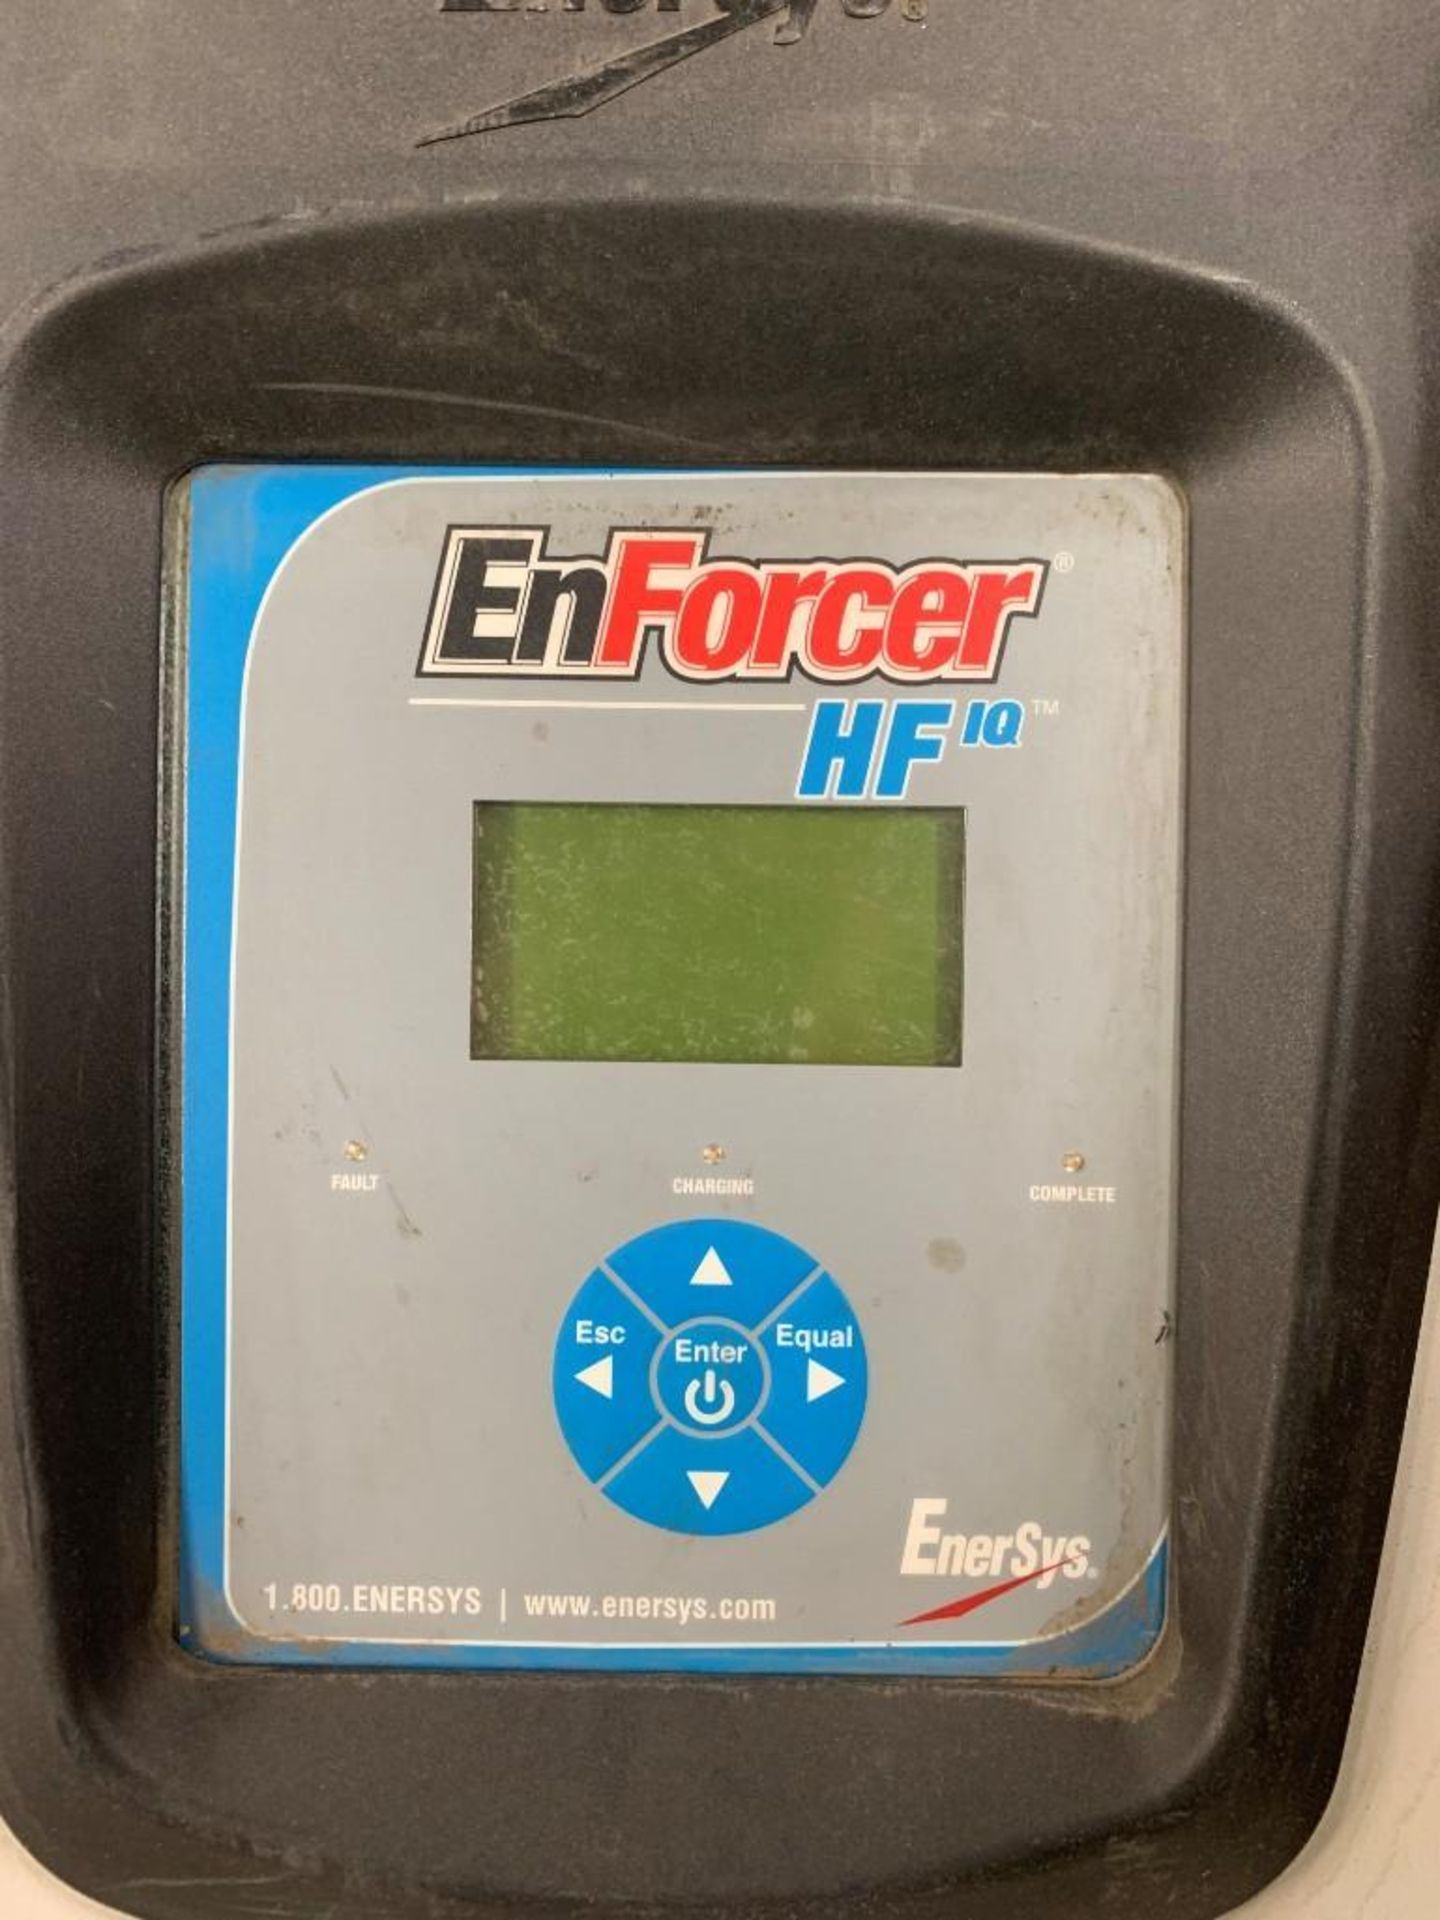 ENERSYS ENFORCER HIGH FREQUENCY MULTI-VOLT BATTERY CHARGER, MODEL EQ3-10-1, 1,500 AMP HOURS, 24/36/4 - Image 2 of 4